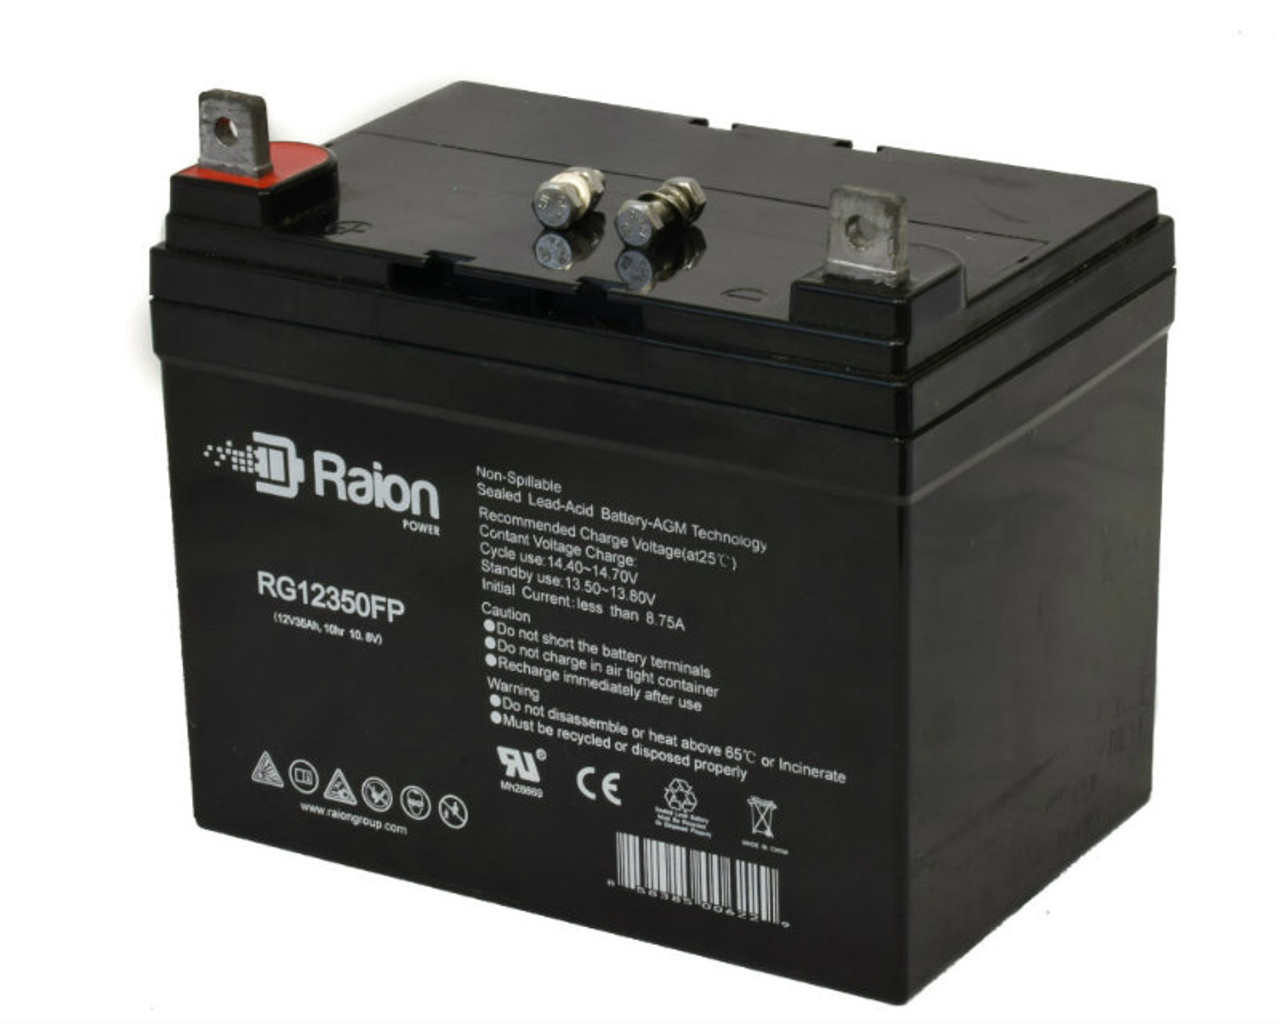 Raion Power Replacement 12V 35Ah RG12350FP Mobility Scooter Battery for Amigo Mobility Fiesta IV 770000